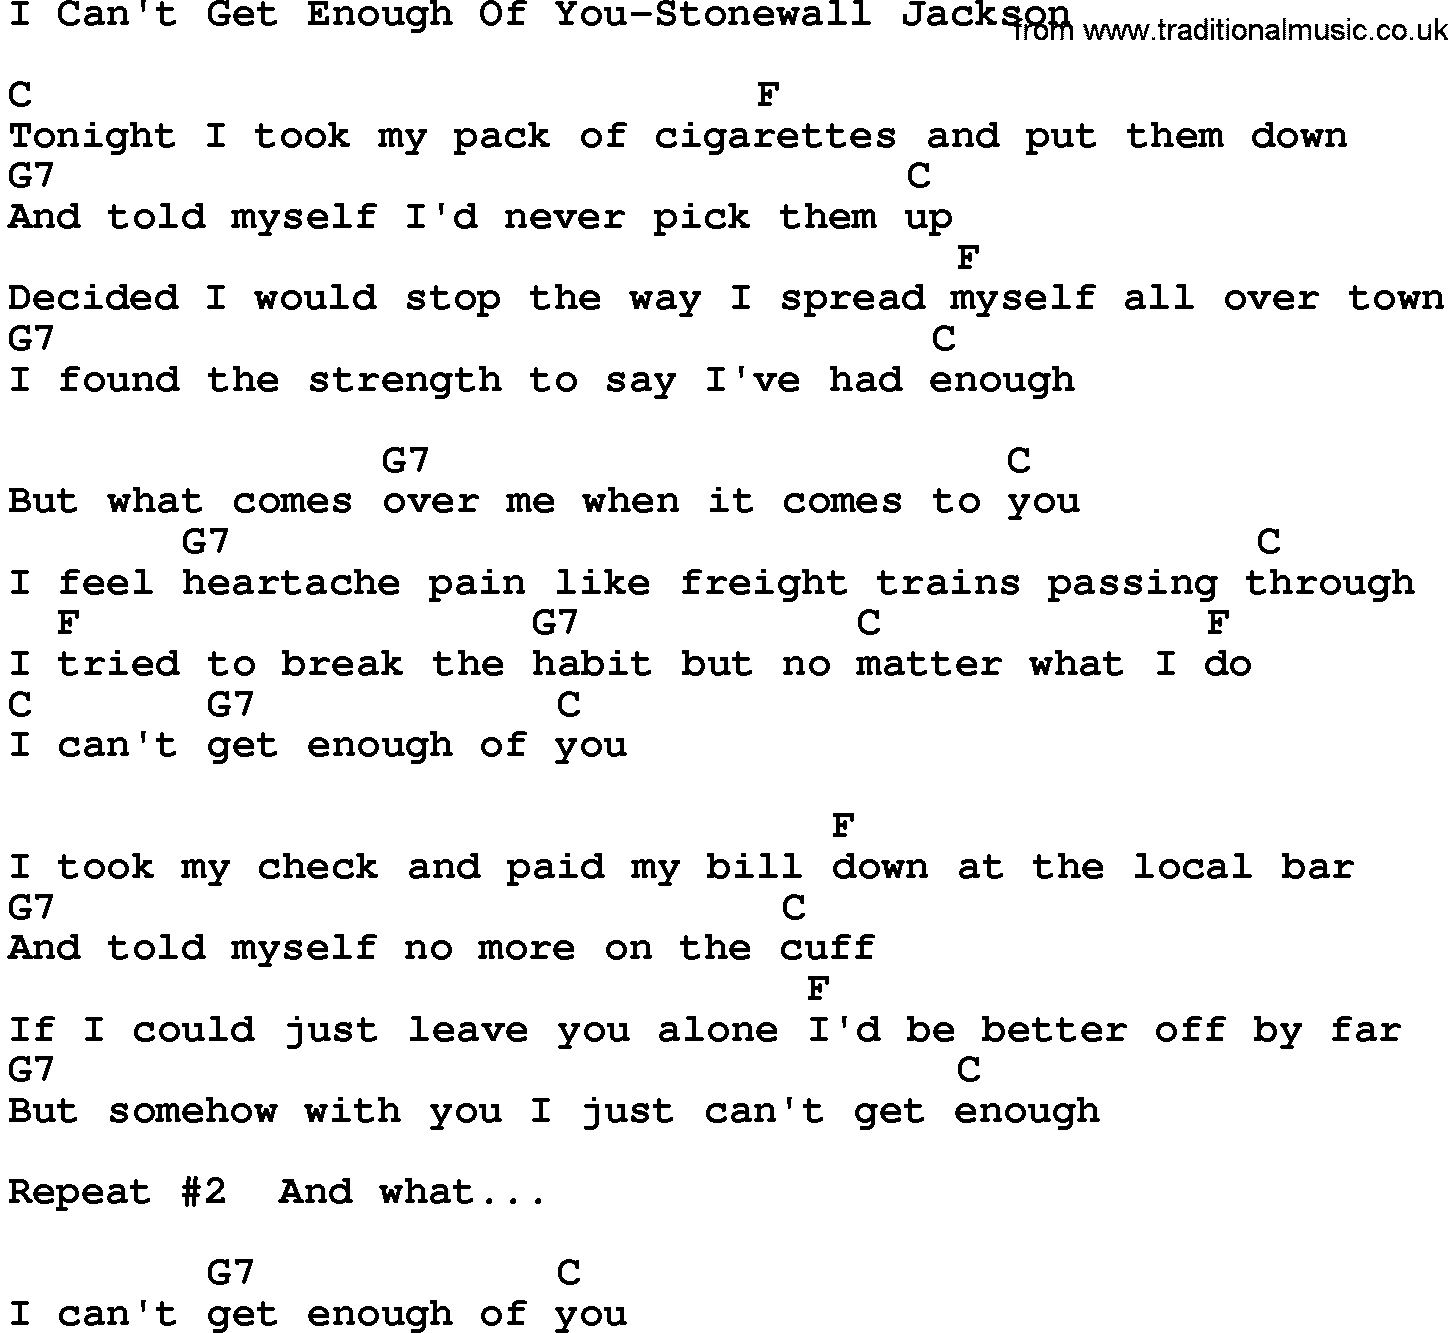 Country music song: I Can't Get Enough Of You-Stonewall Jackson lyrics and chords